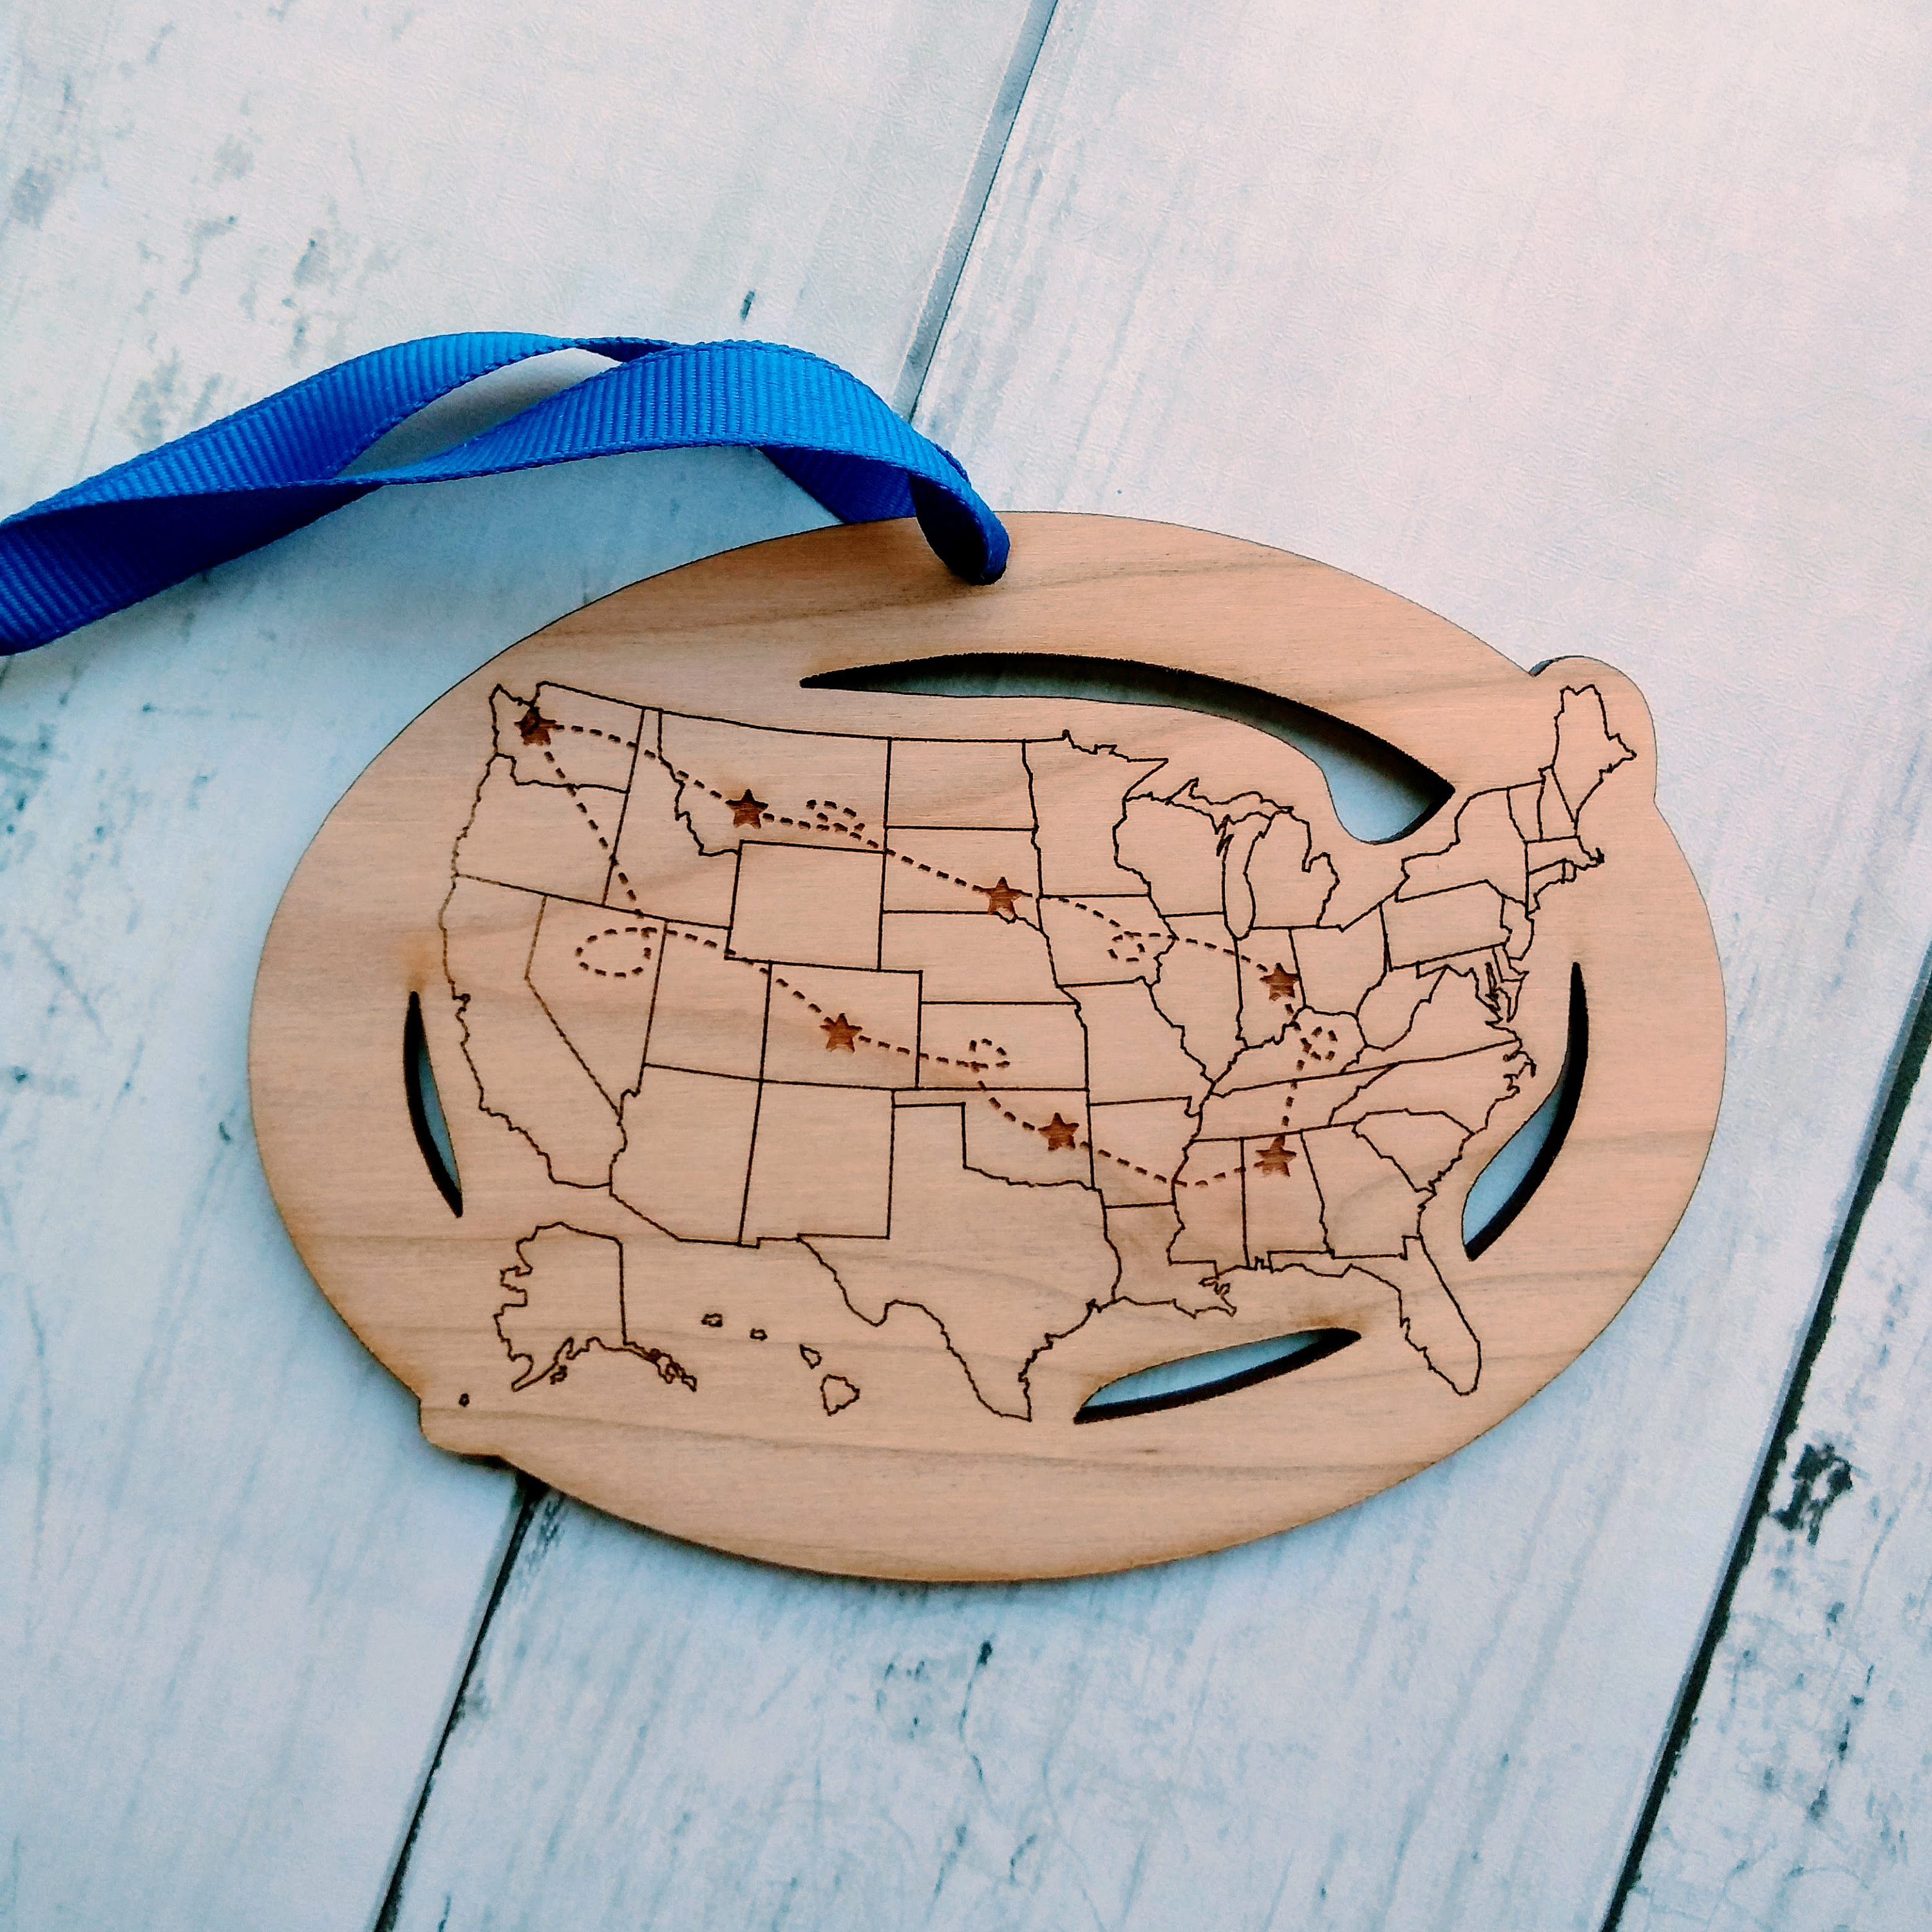 Road Trip Travel Ornament Long Distance Relationship Washington United States Up to 10 Cities Custom Cities West Coast US Map ornament